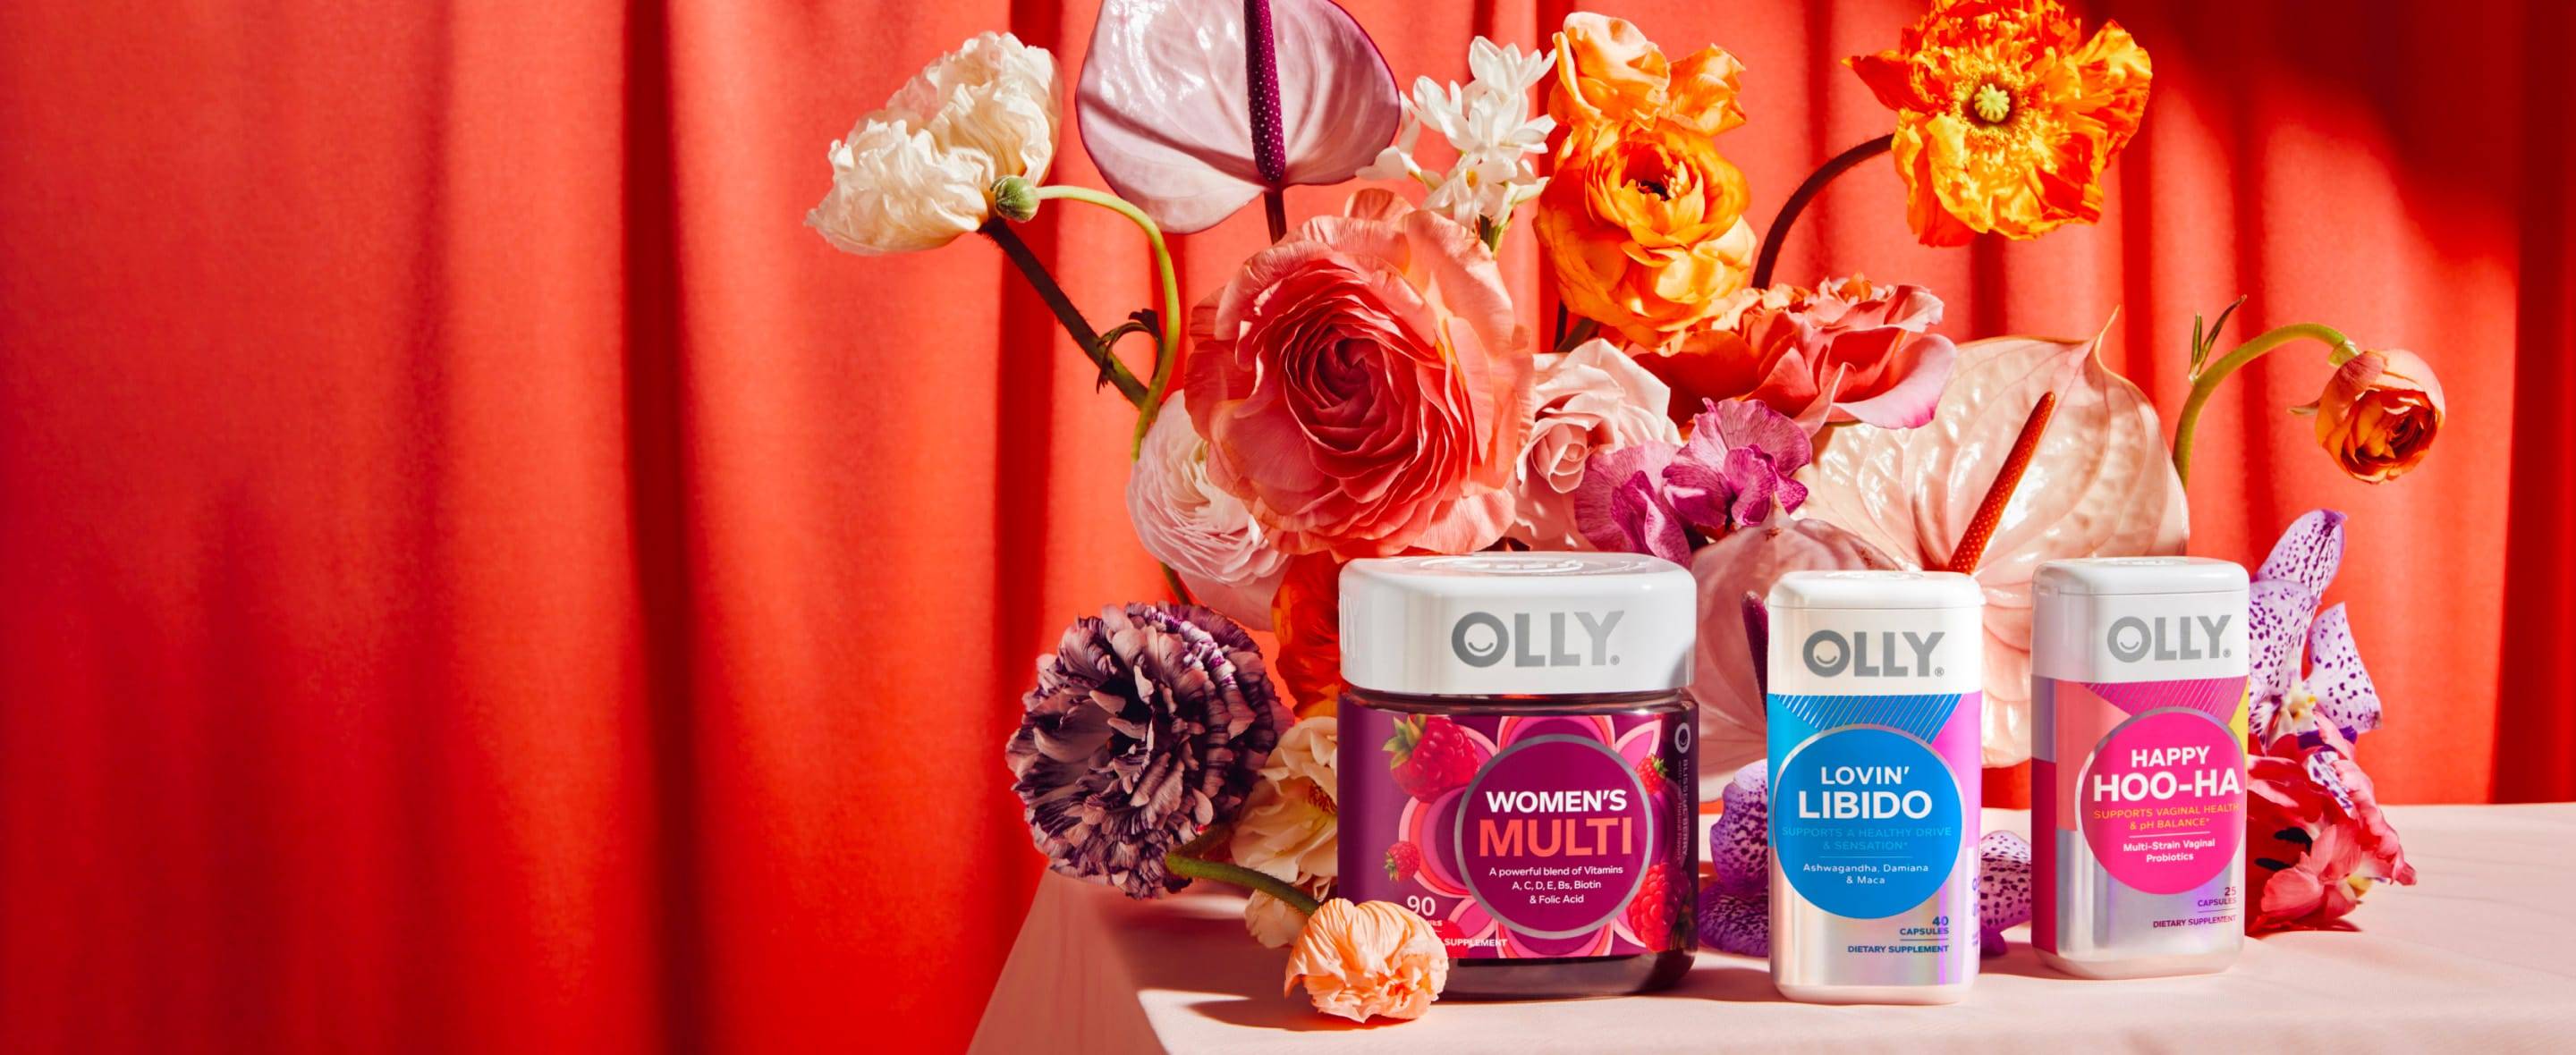 OLLY Valentine's Day Products